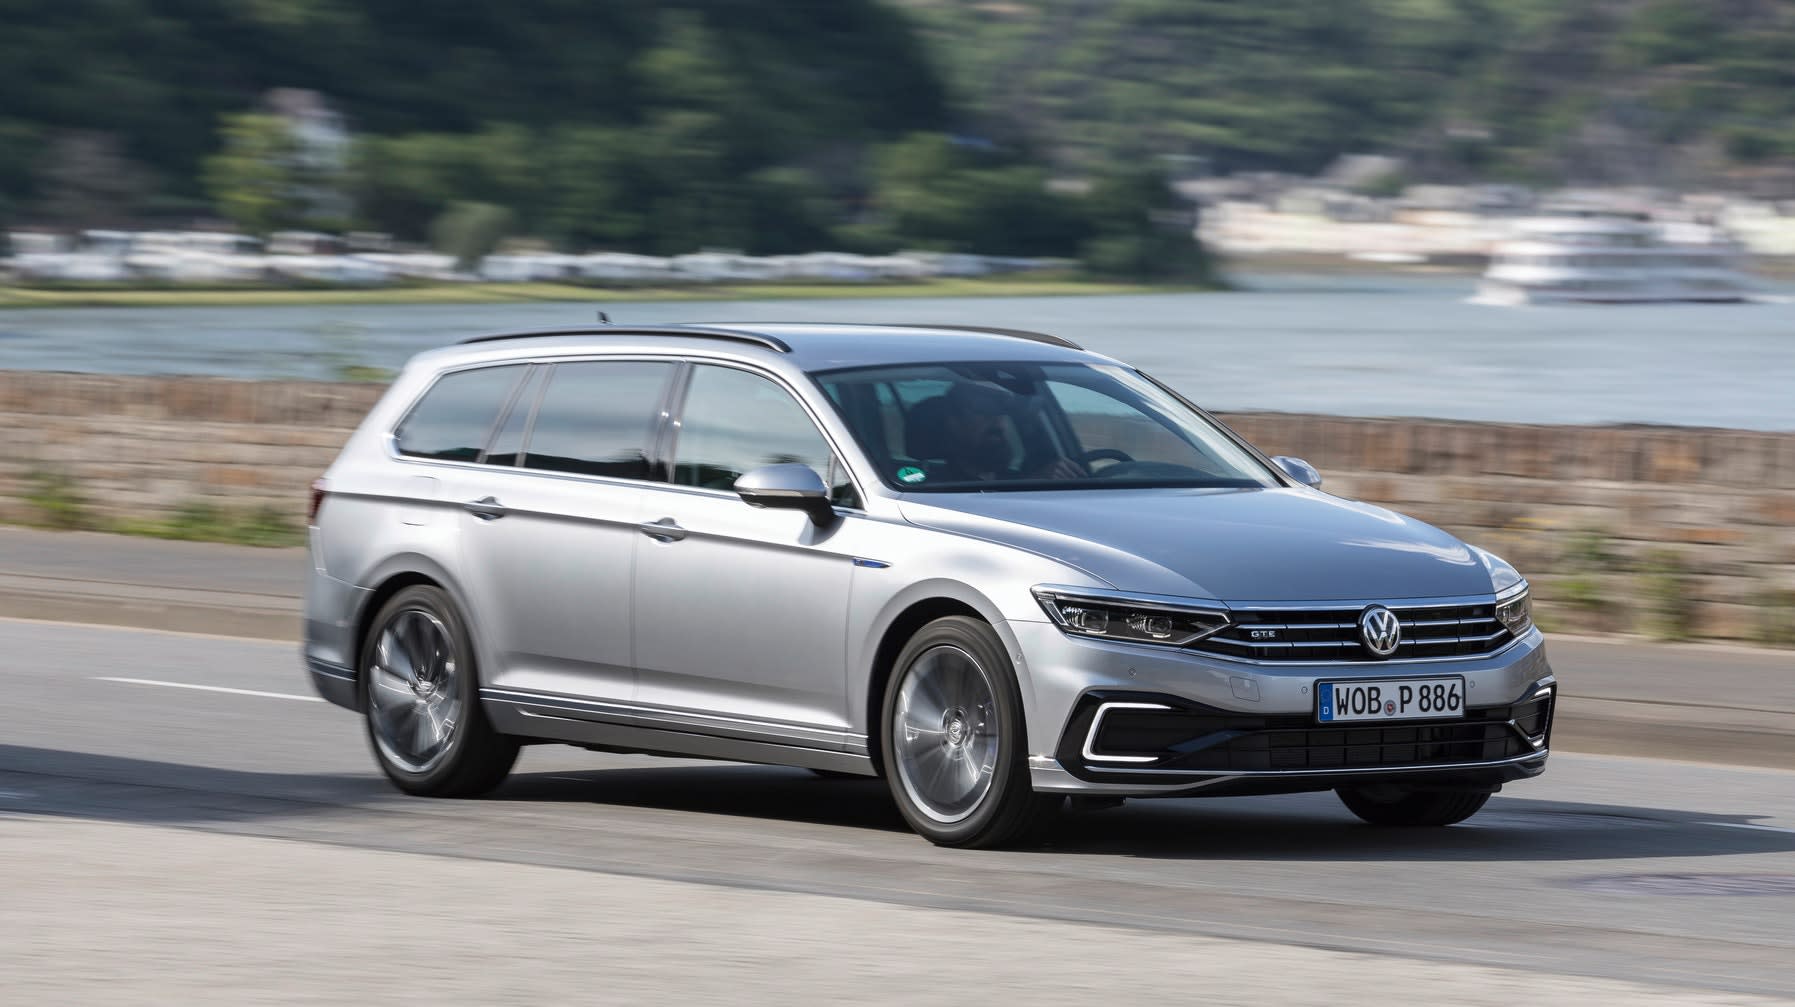 First drive The Volkswagen Passat GTE is a comfortable and refined